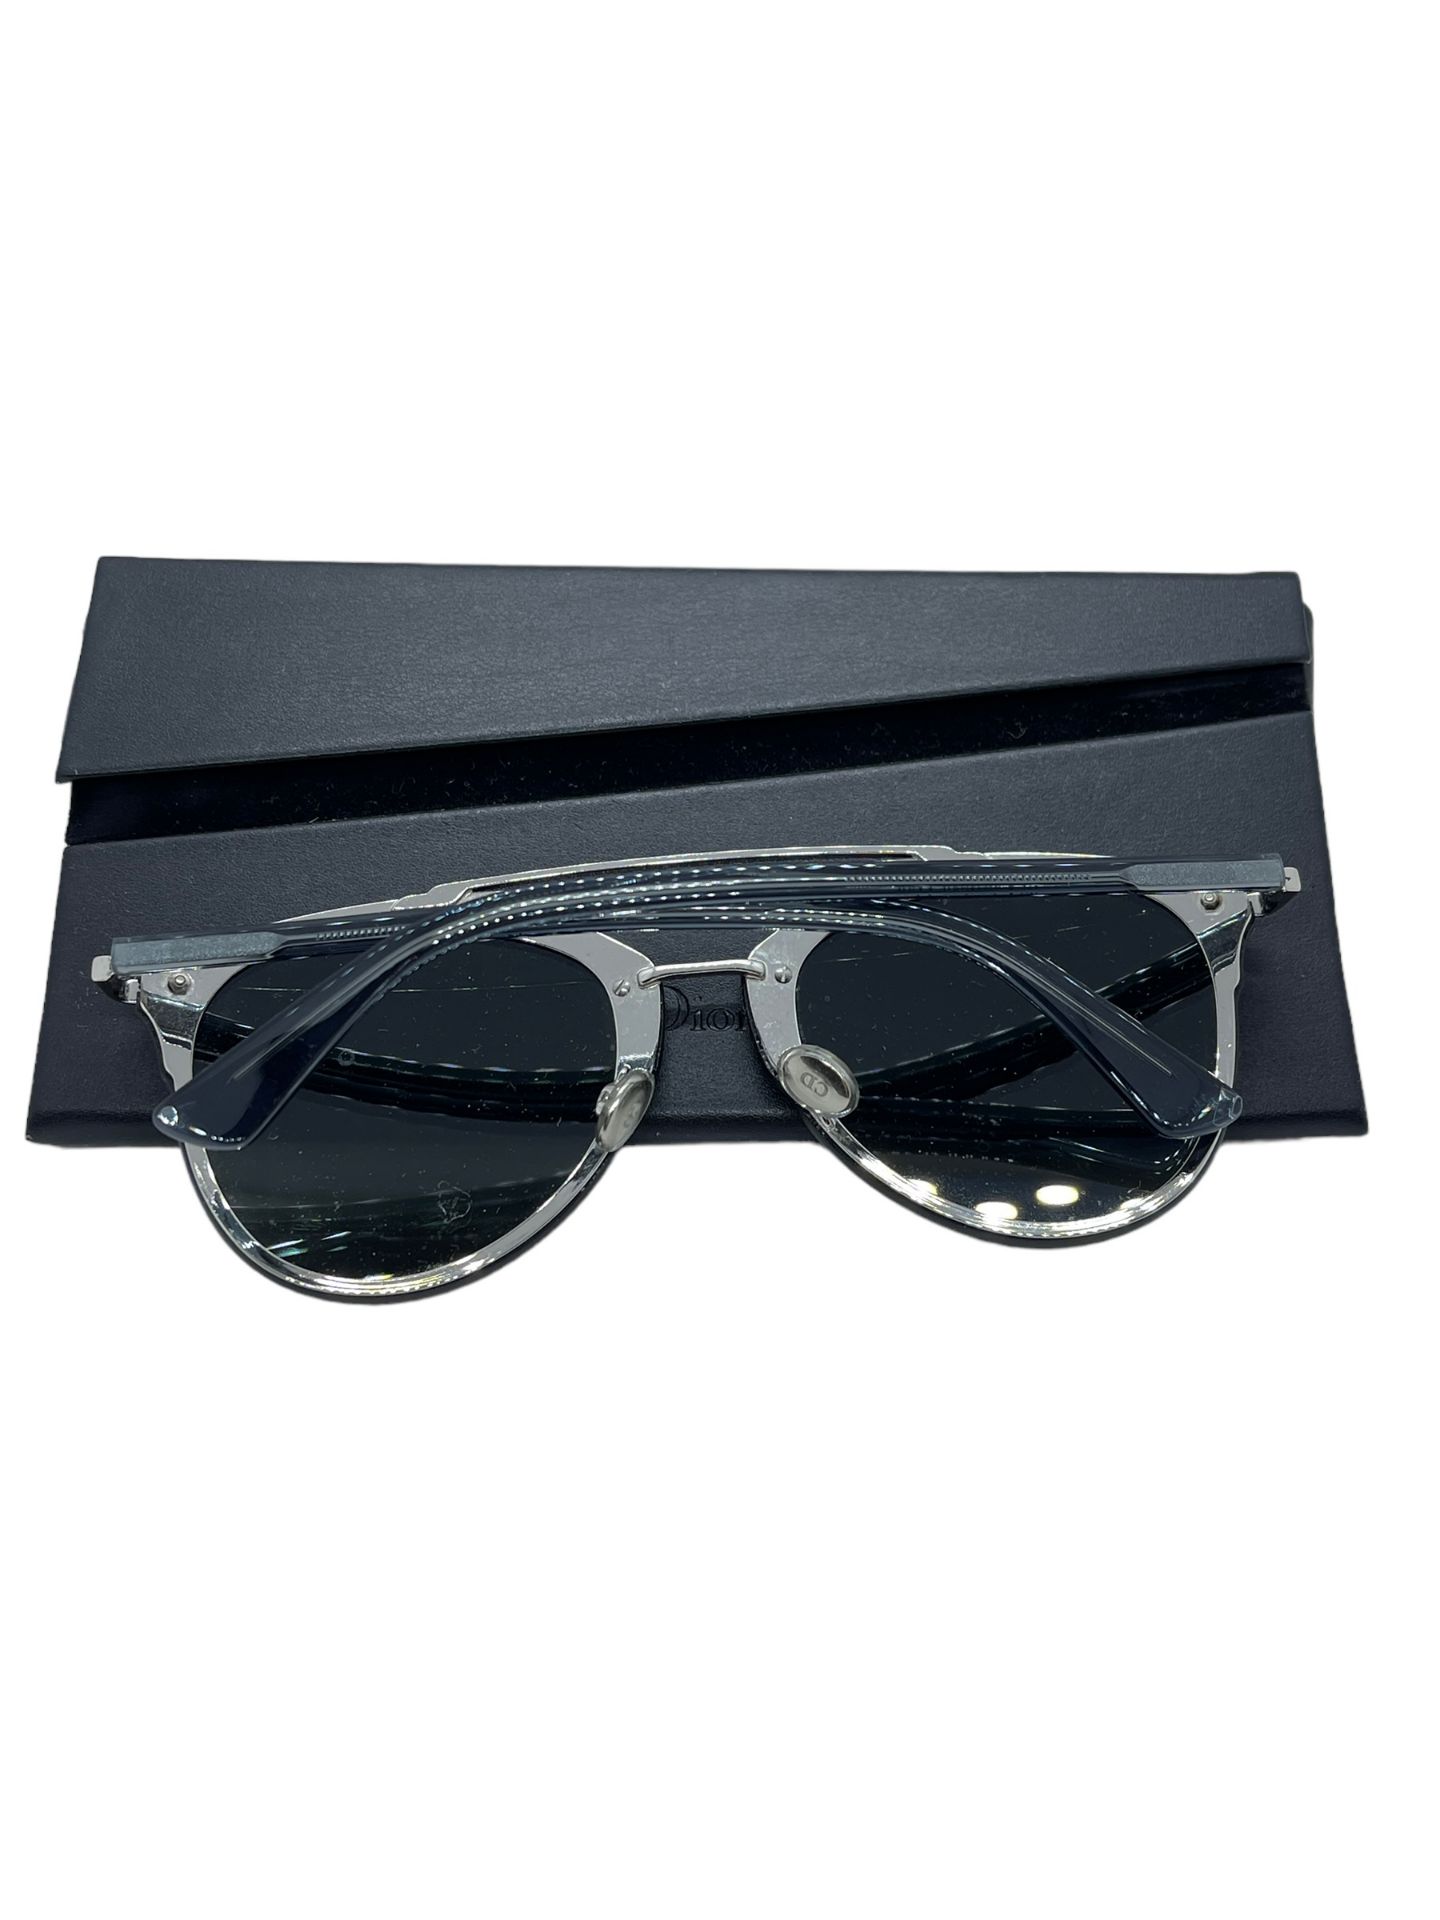 DIOR UNISEX SUNGLASSES XDEMO WITH BCASE PAPER ECT - Image 4 of 6